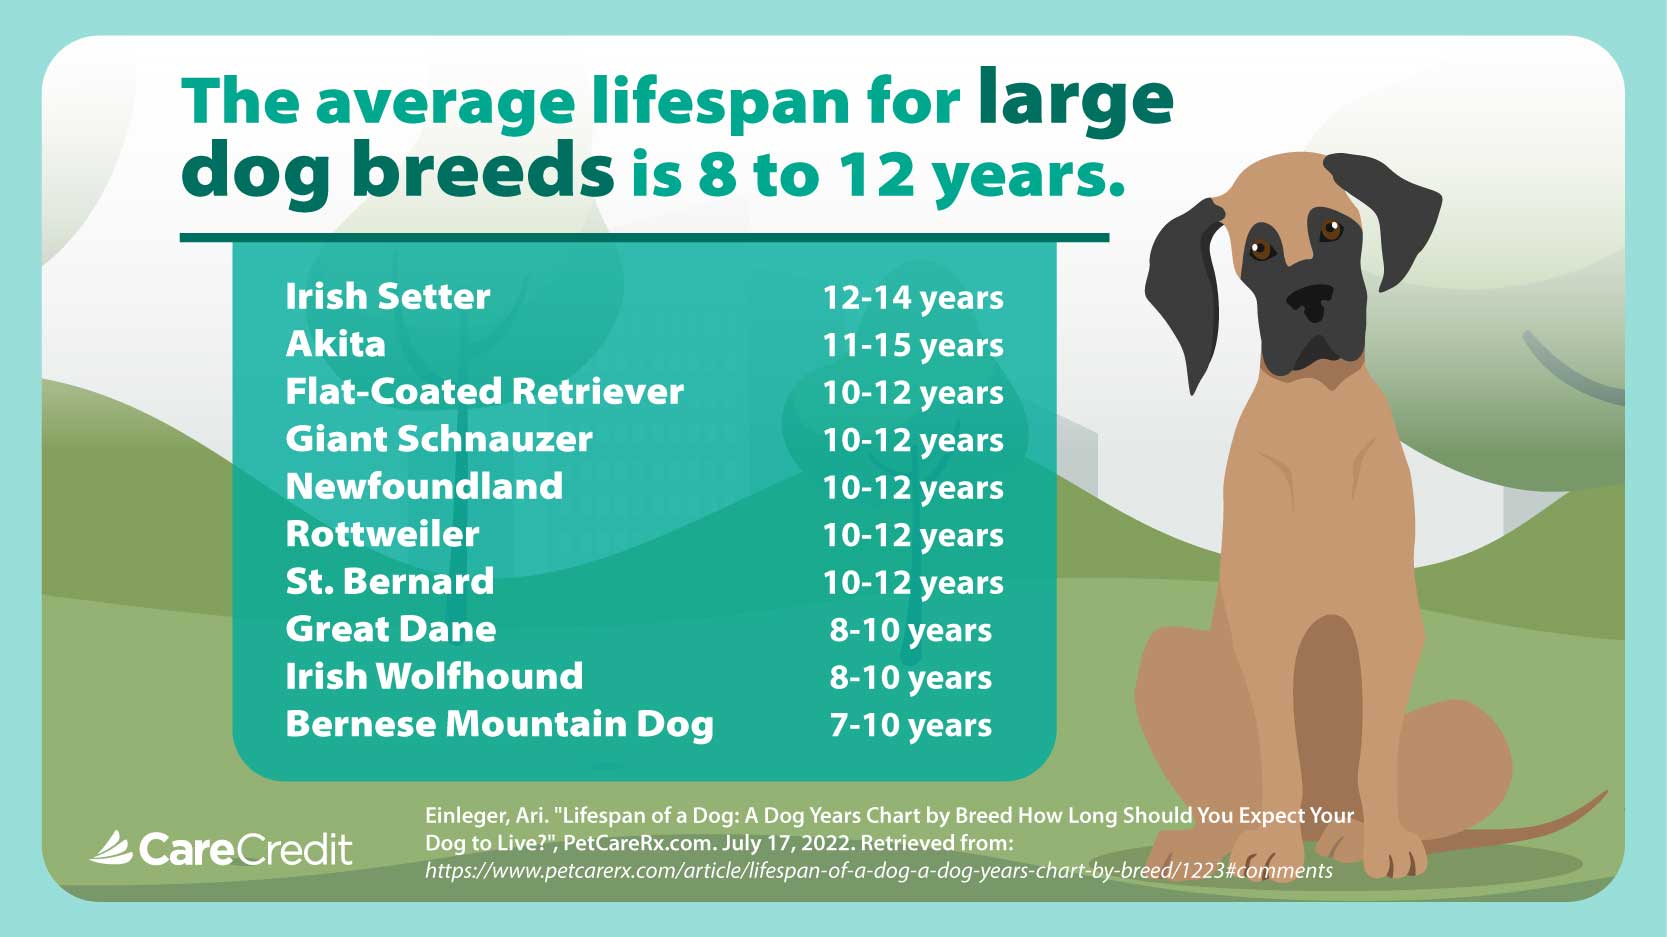 The average lifespan for large dog breeds is 8 to 12 years.